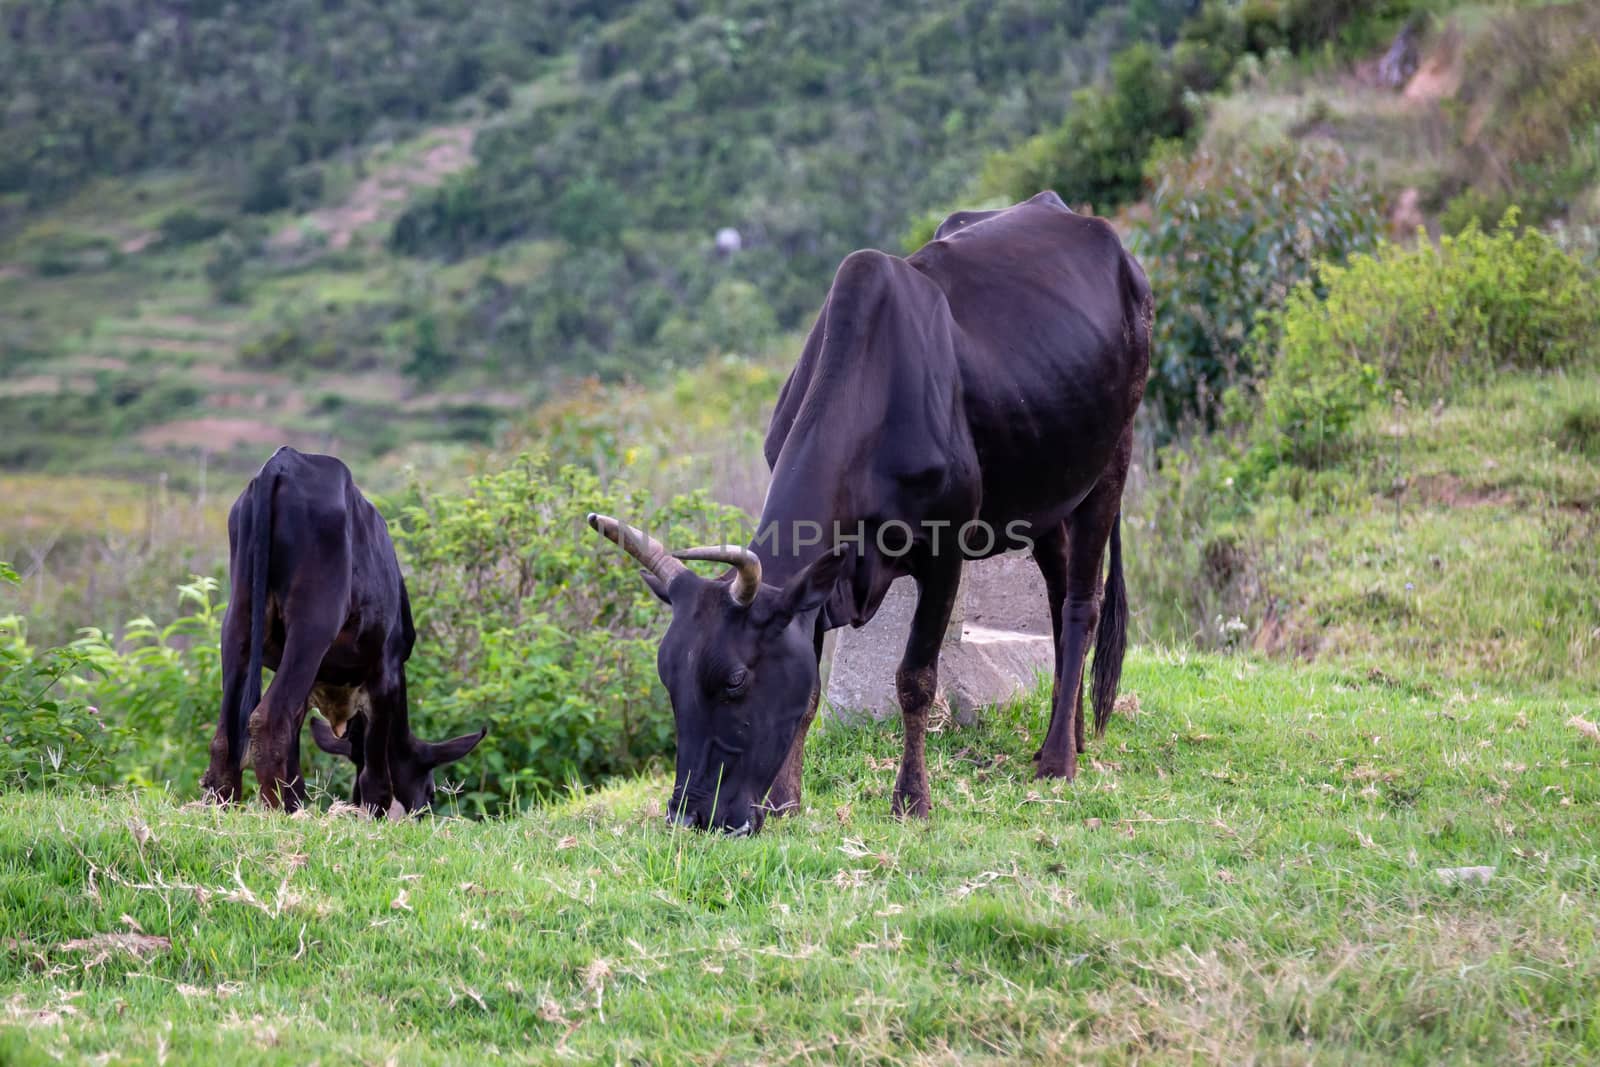 Zebu cattle in the pasture on the island of Madagascar by 25ehaag6